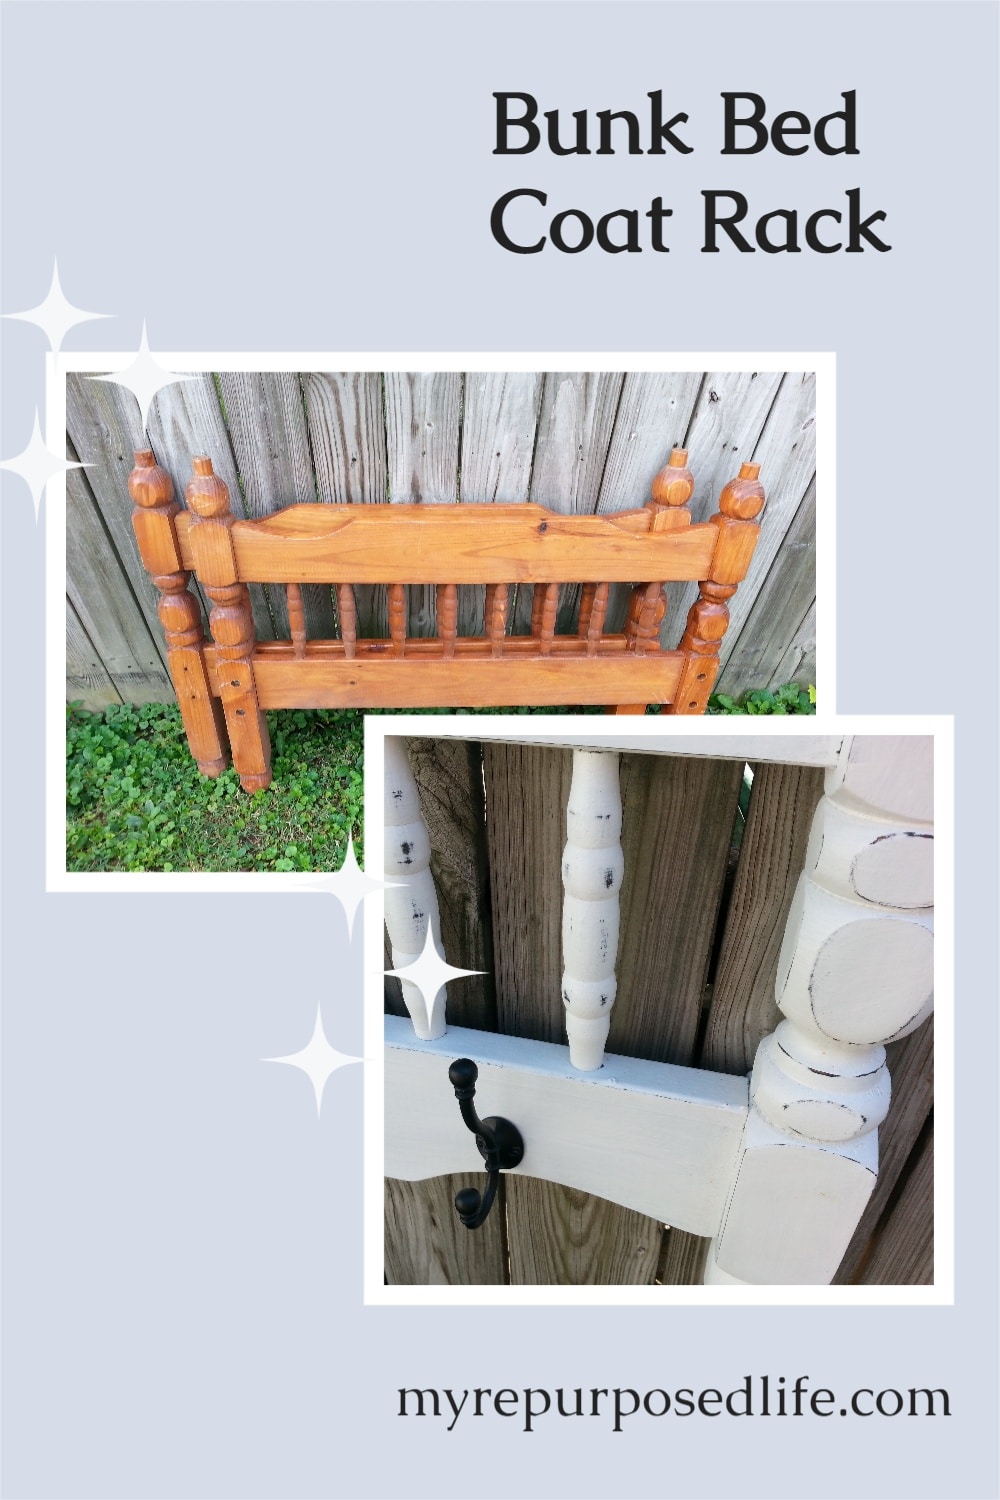 My Repurposed Life will show you how to make a DIY Coat Rack out of a repurposed bunk bed. Great tips on painting and distressing. #MyRepurposedLife #repurposed #bed #bunkbed #diy #coatrack #distressed #painting via @repurposedlife